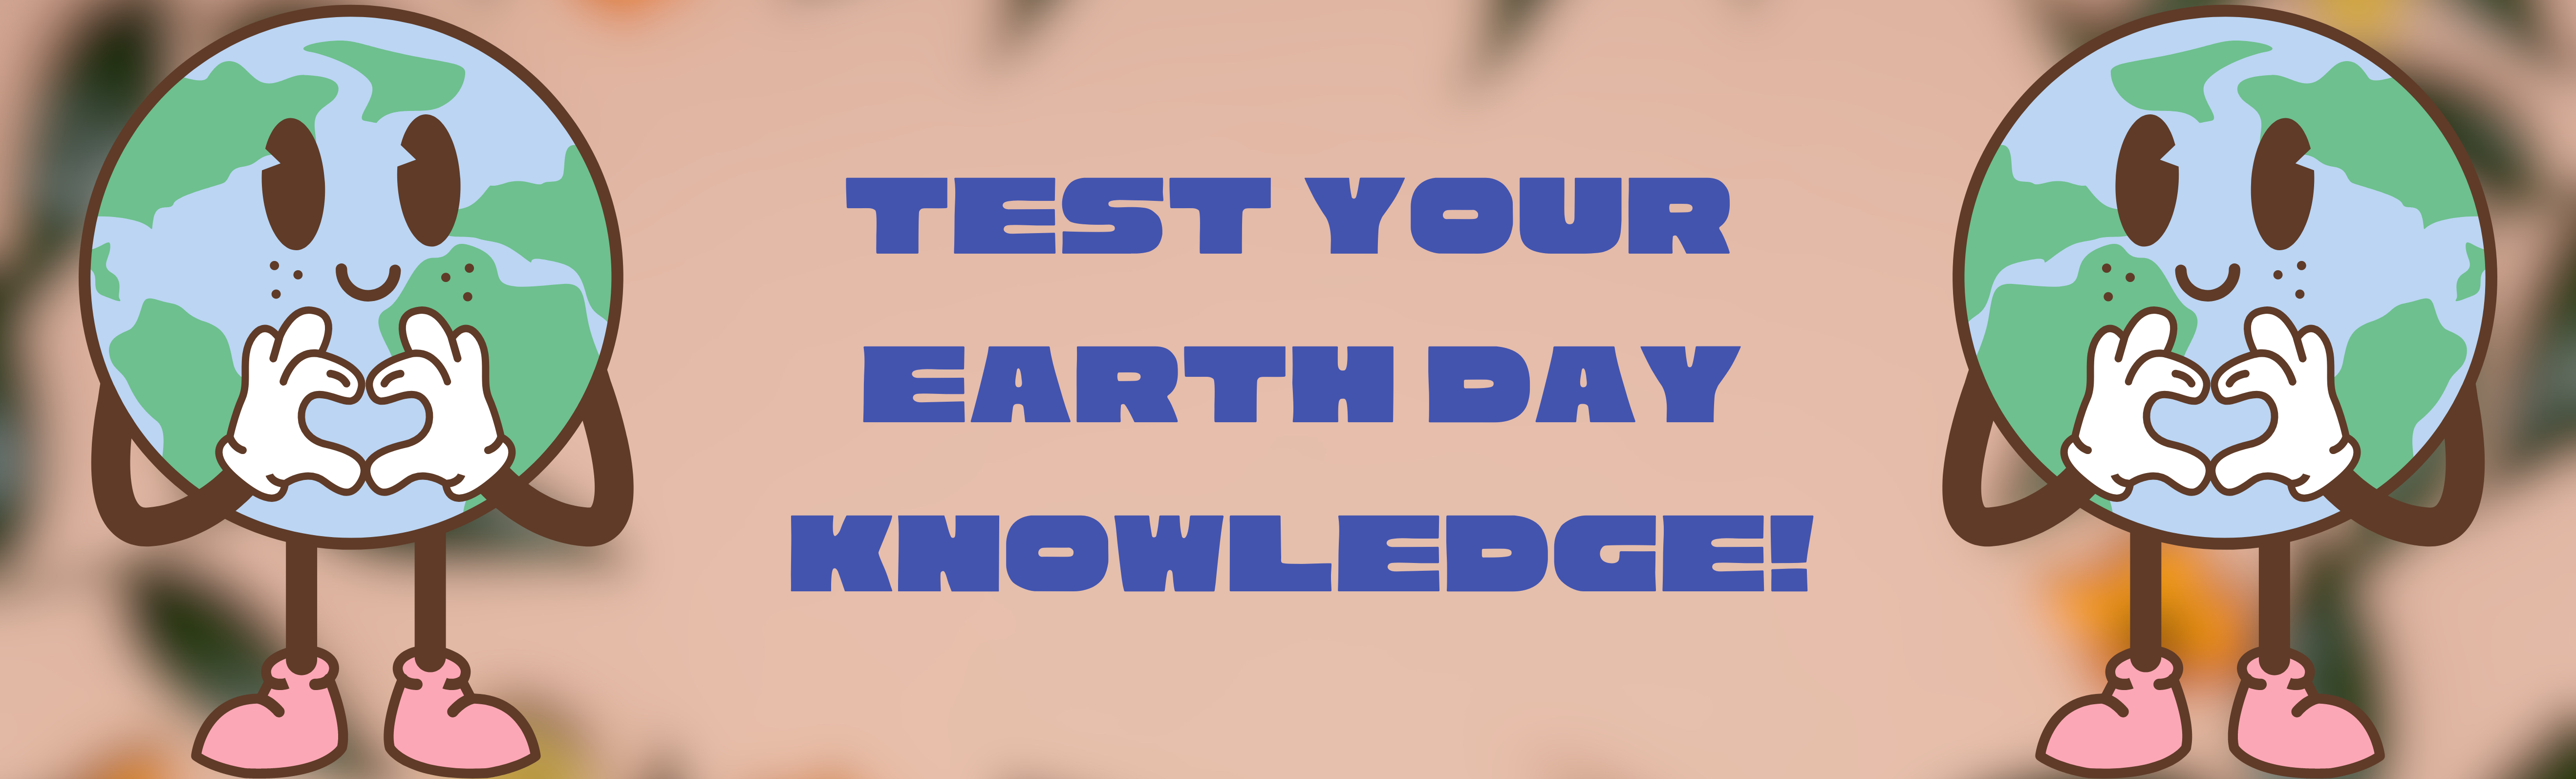 earth day quiz banner